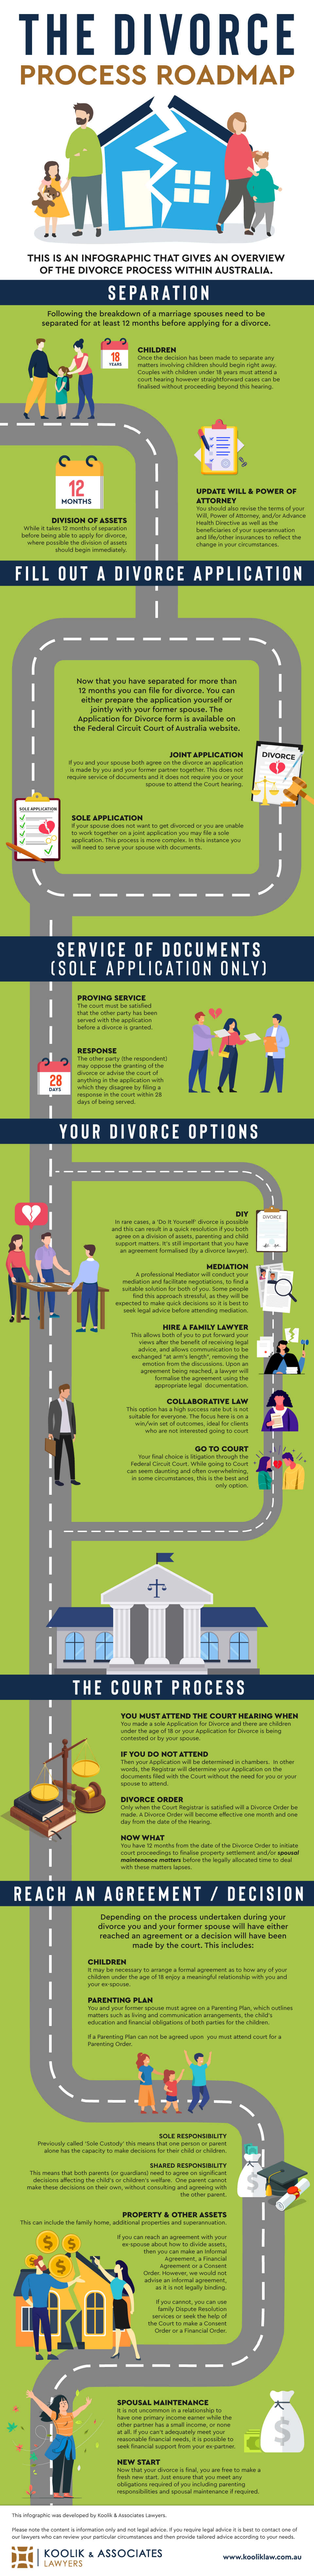 An infographic detailing the divorce process